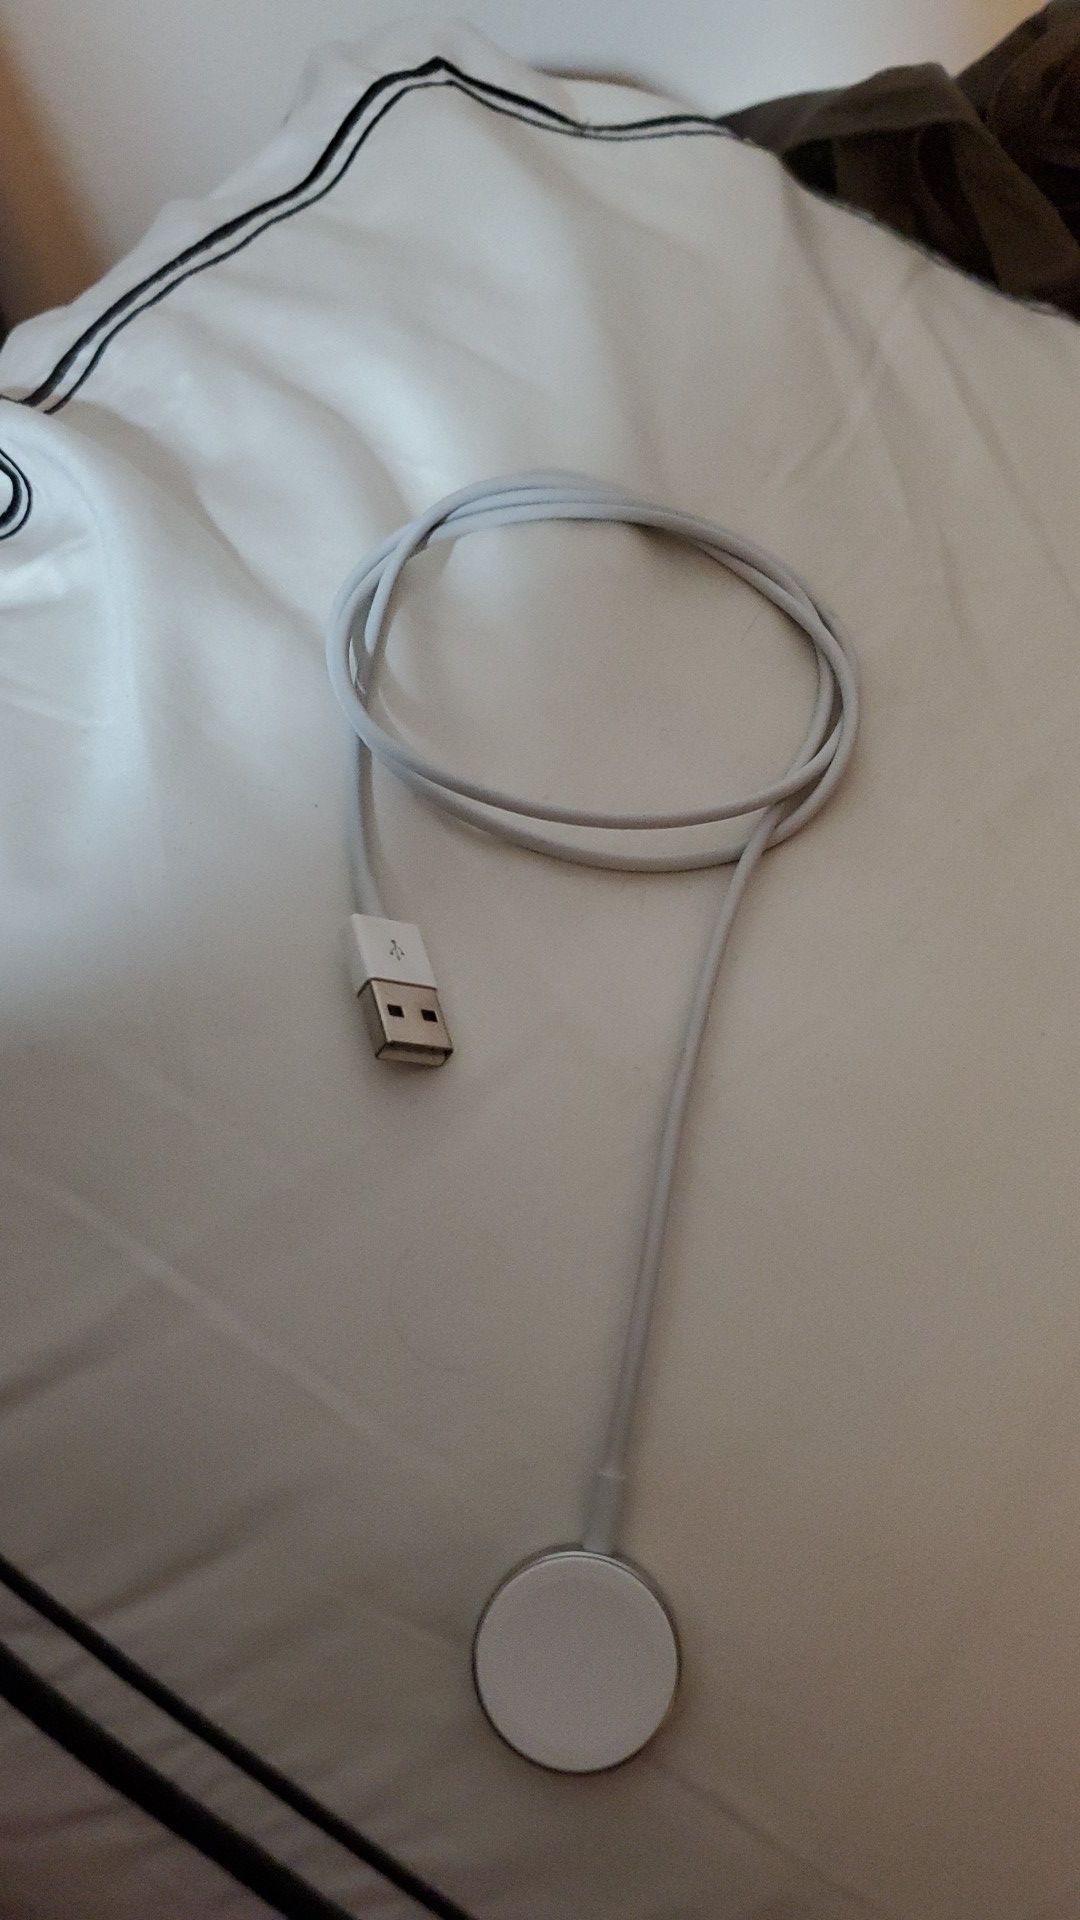 Apple watch Charger